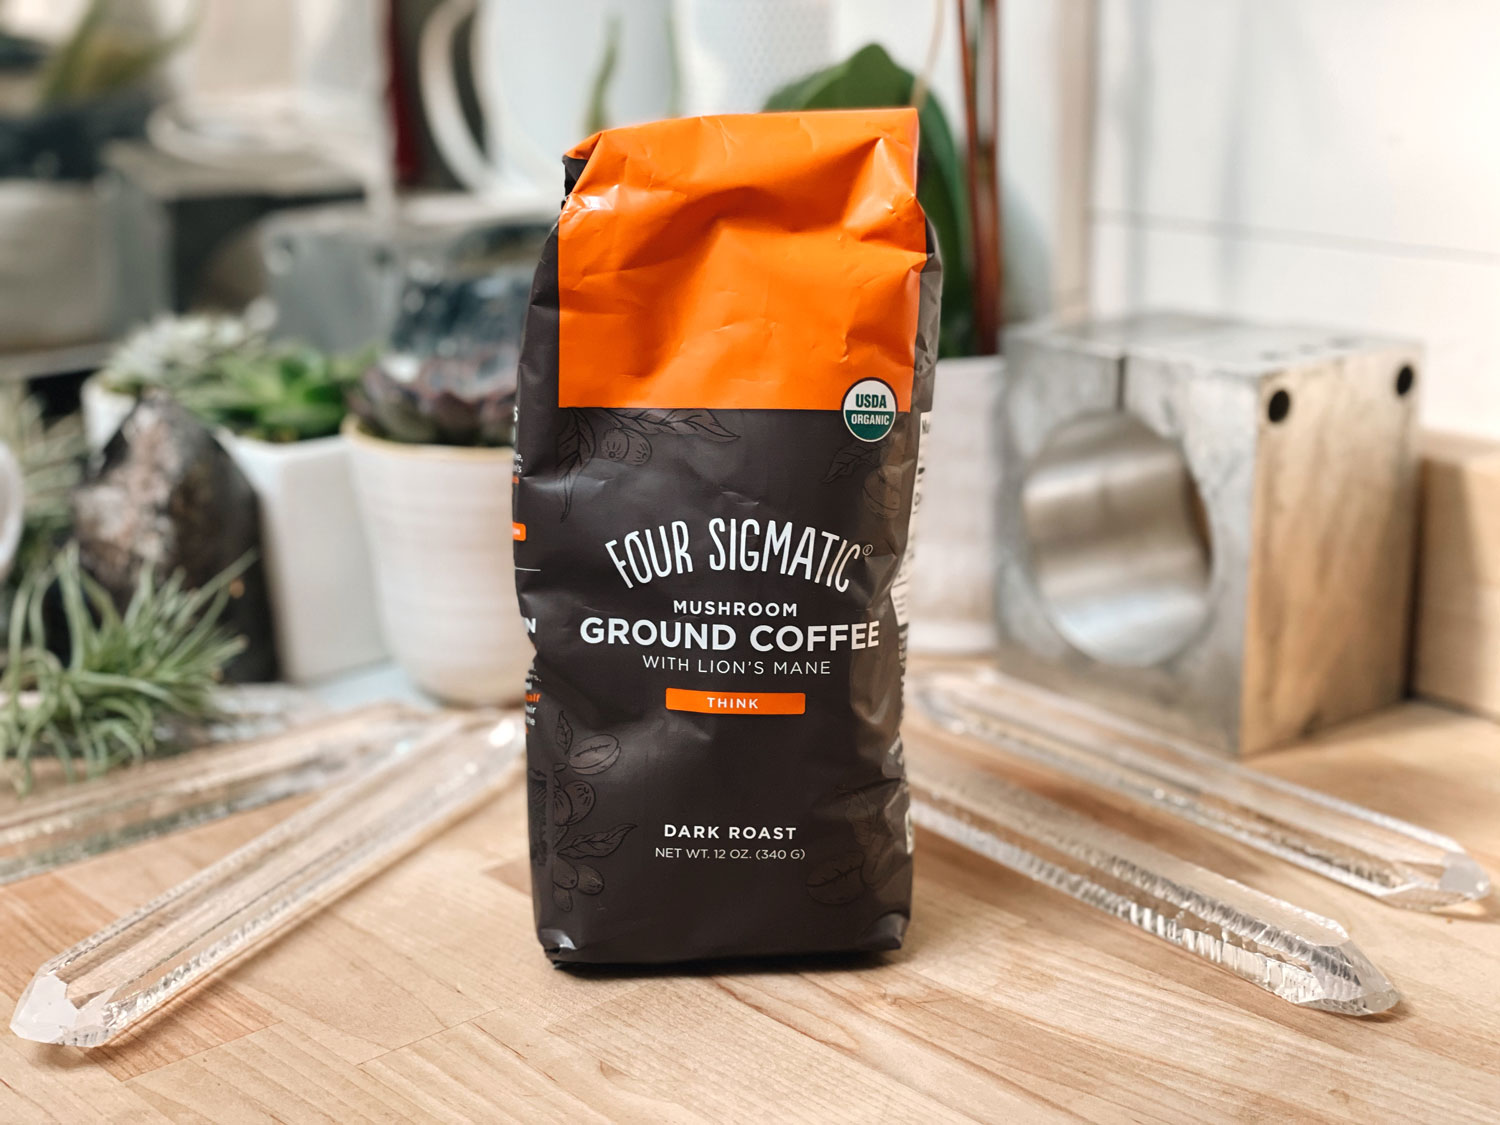 https://www.breakfastcriminals.com/wp-content/uploads/2021/05/Four-Sigmatic-Coffee-Review-1.jpg